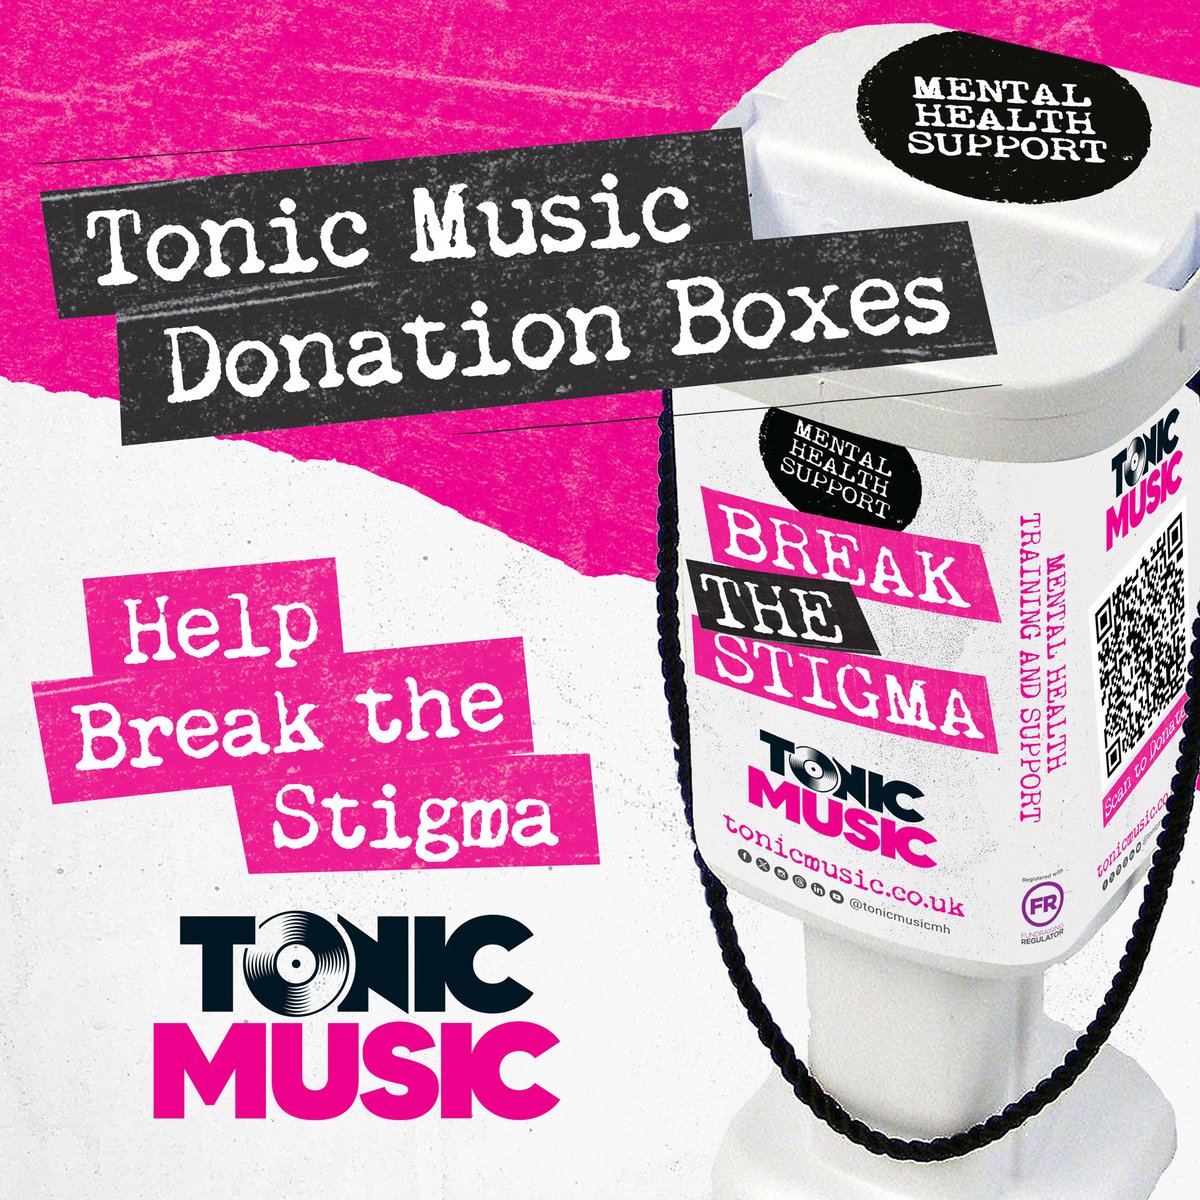 Help us reduce the stigma around mental health by hosting a pot at your venue or shop. Interested? Visit → tonicmusic.co.uk/post/pot24

#MentalHealth #Tonic #Music #Wellbeing #NeverMindTheStigma #TonicRider